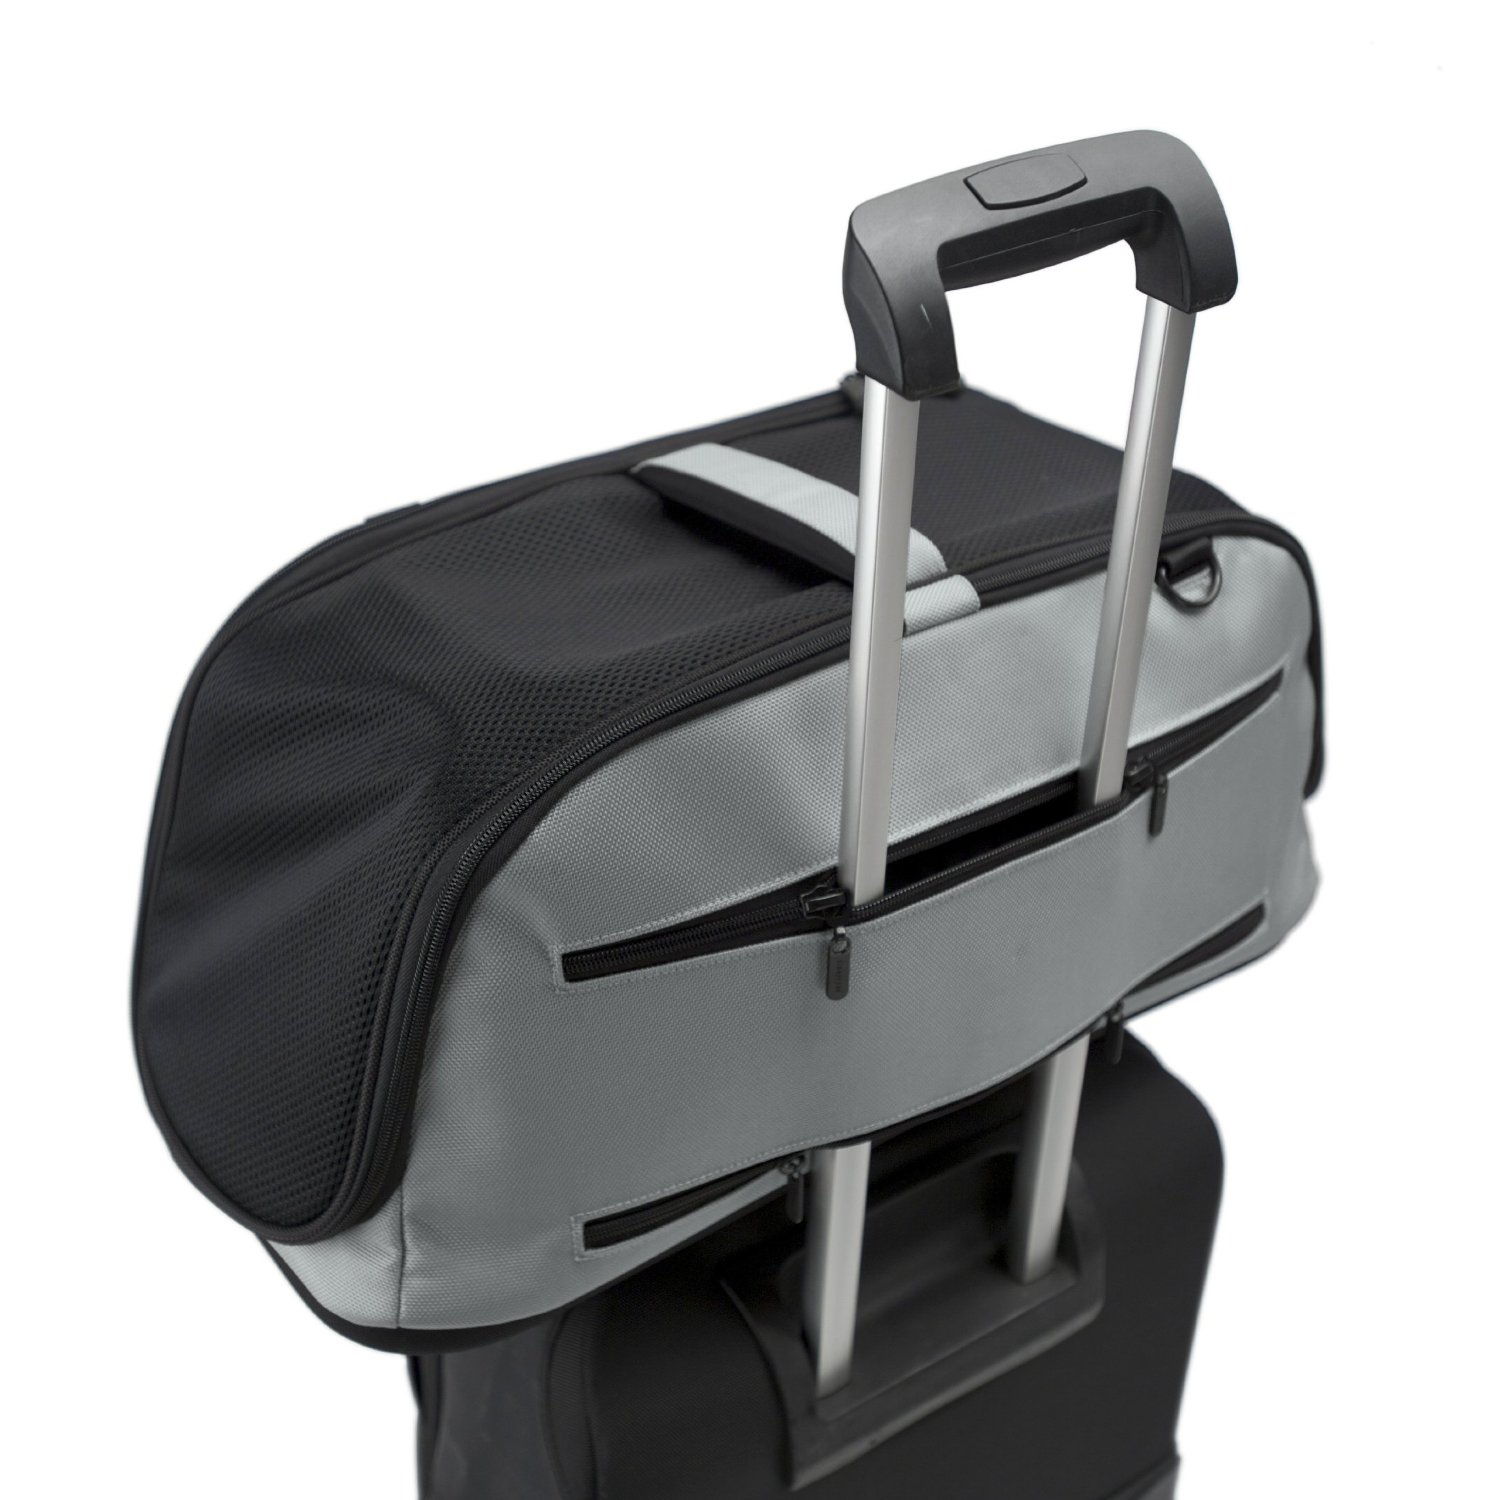 Best Pet Carriers for Air Travel Uk Reviews 2020 - Top 5 ...